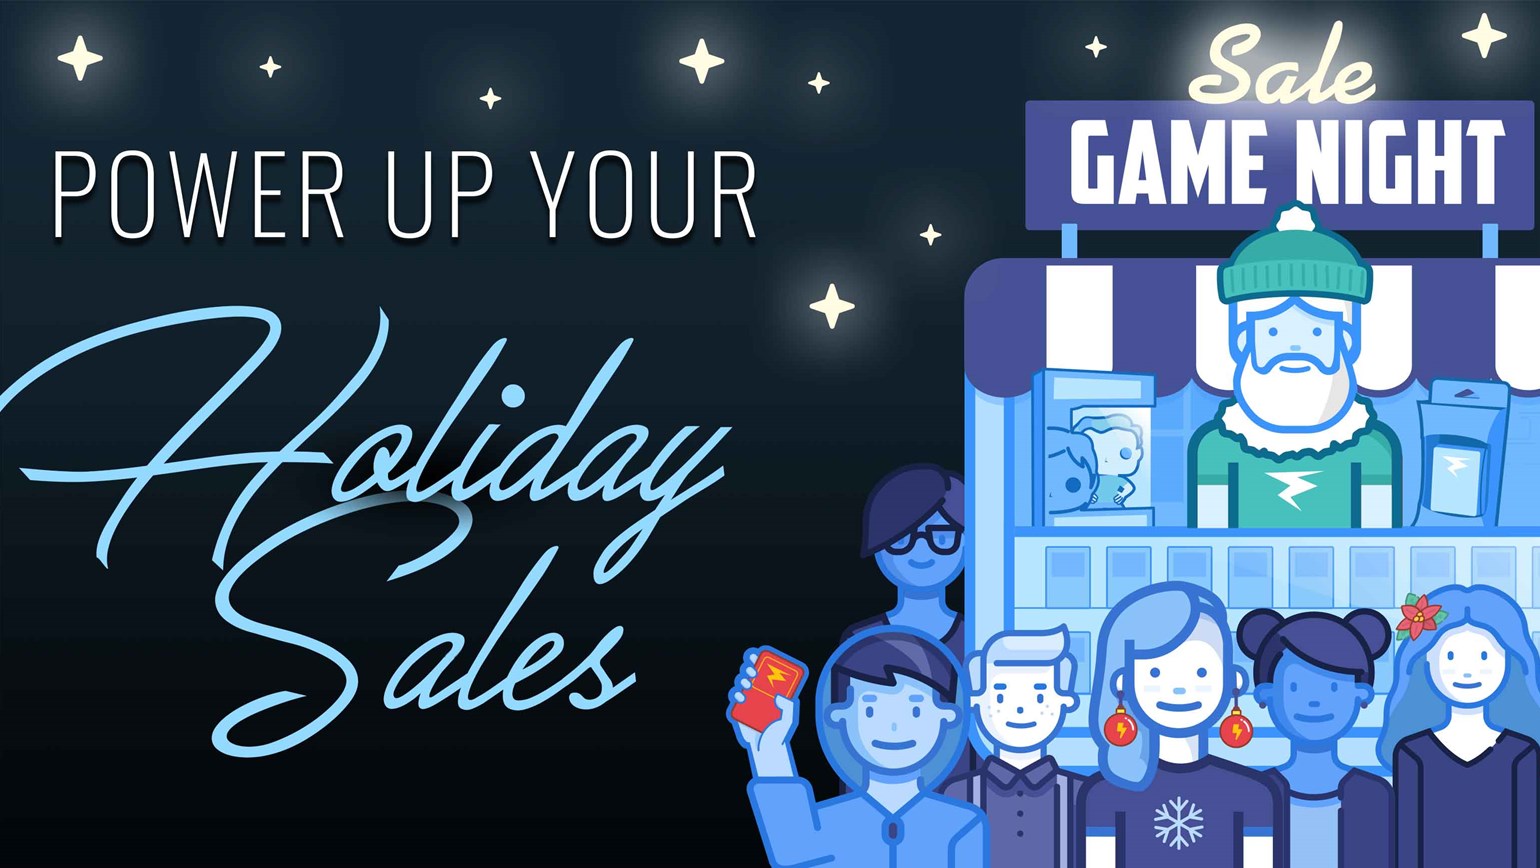 Power Up Your Holiday Sales